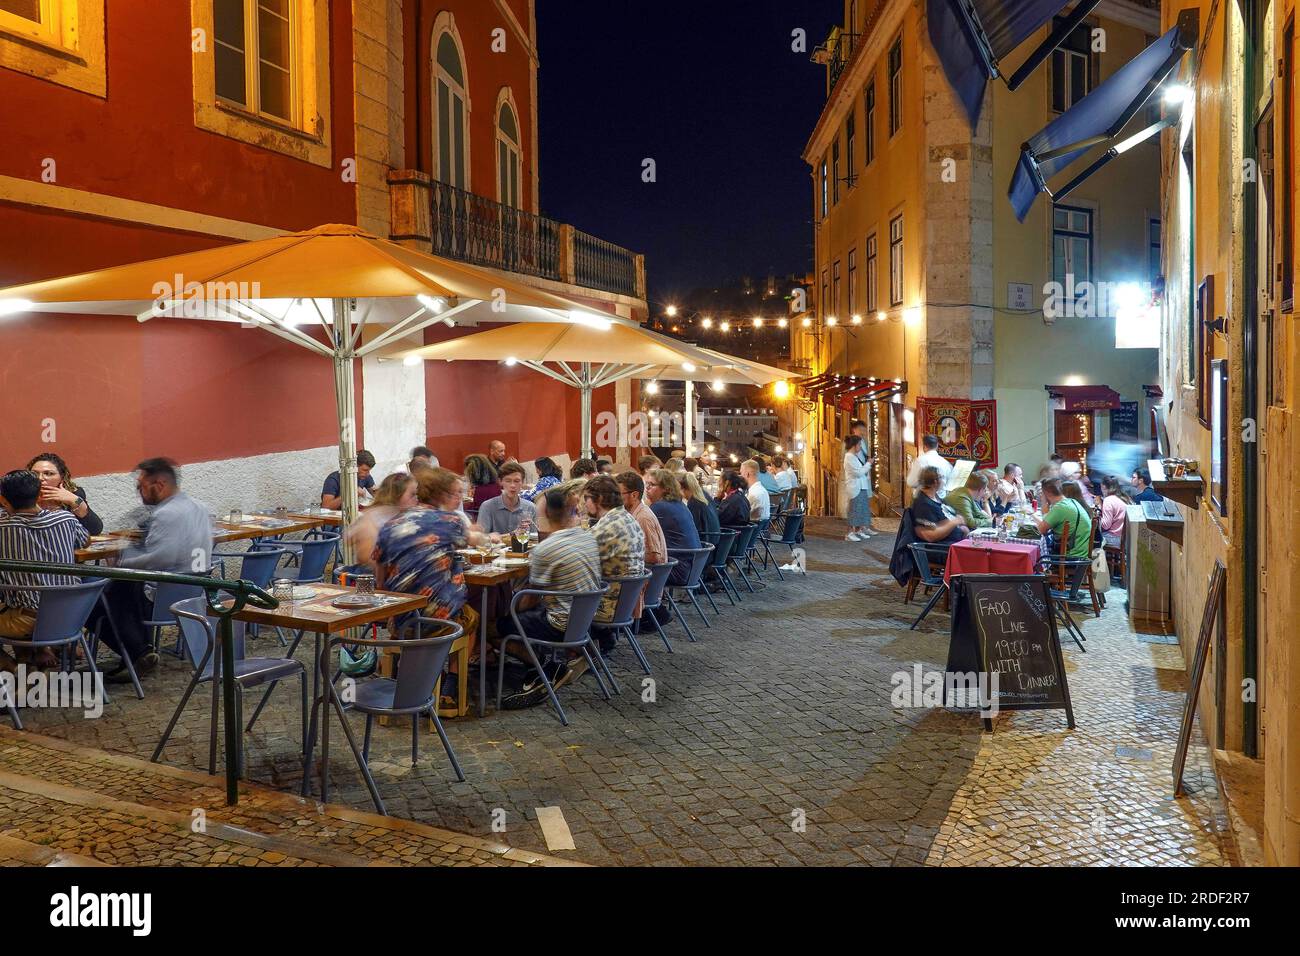 Portugal, Lisbon, Portugal, Lisbon Bairro Alto district, night scene, young people in week-end night party,  bars, restaurants and fado clubs   Photo Stock Photo